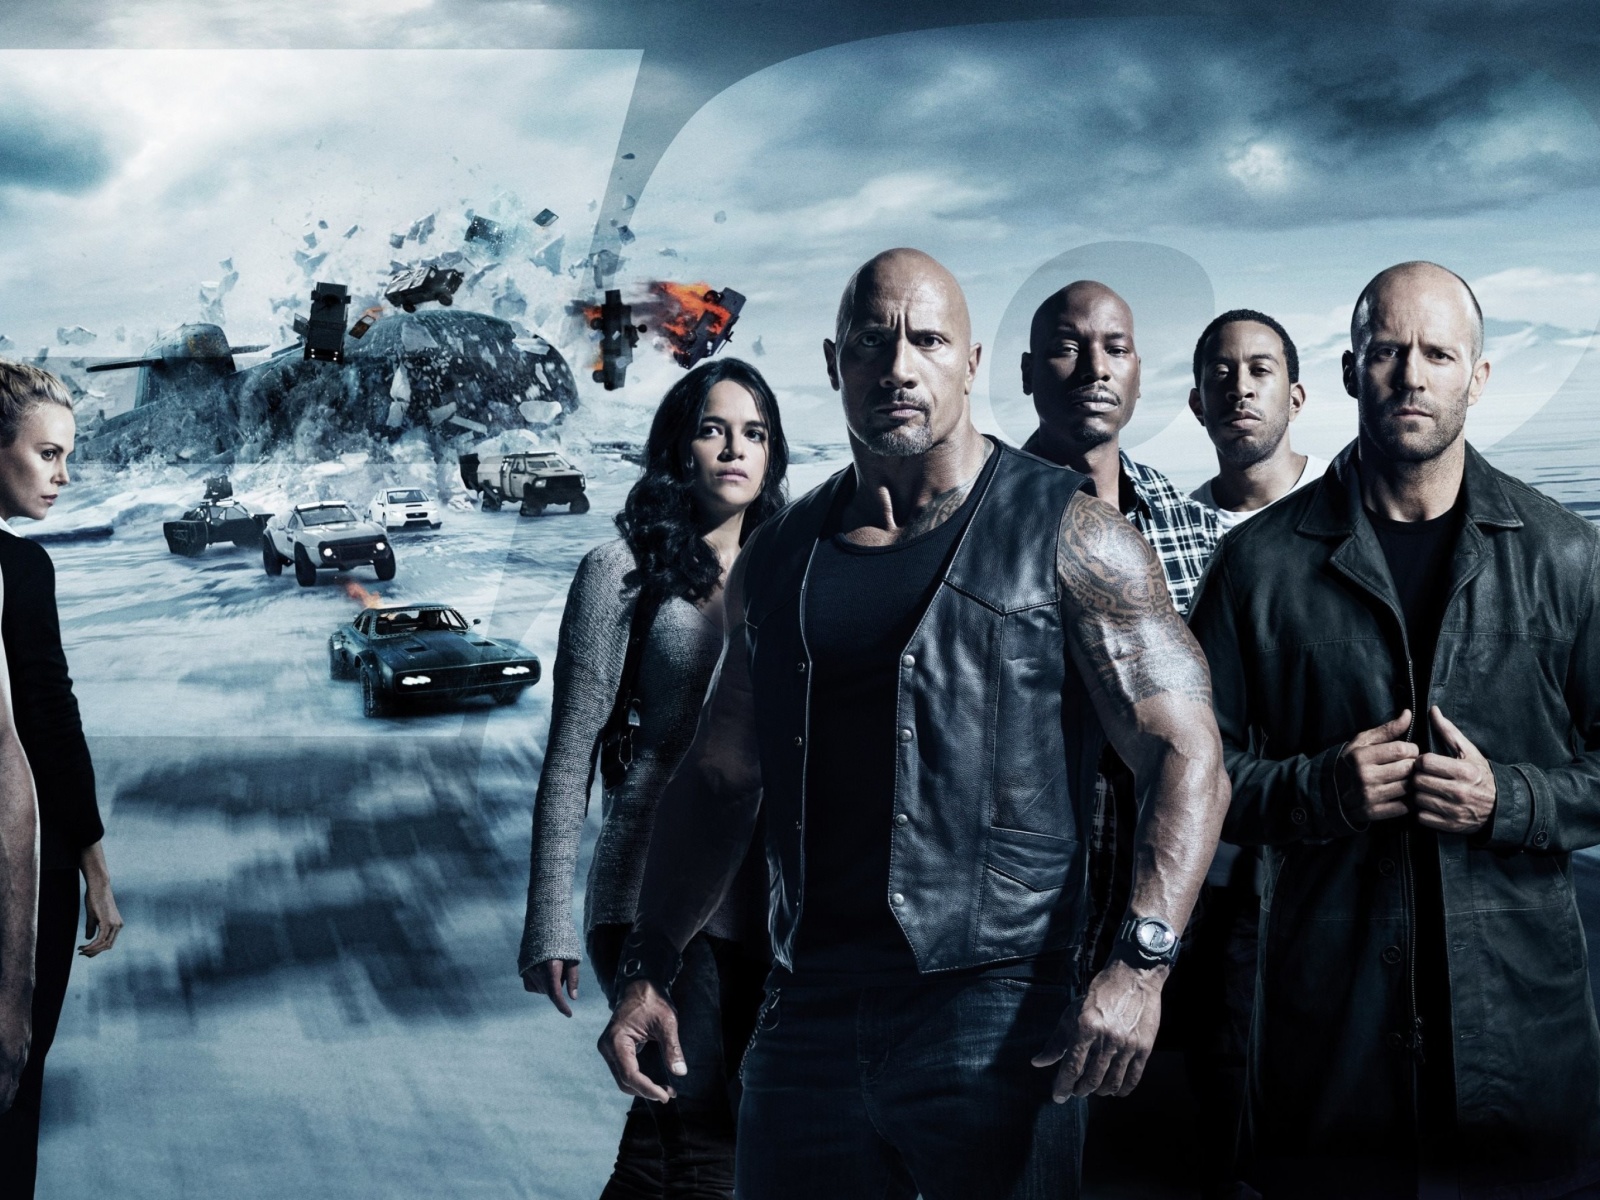 Das The Fate of the Furious with Vin Diesel, Dwayne Johnson, Charlize Theron Wallpaper 1600x1200